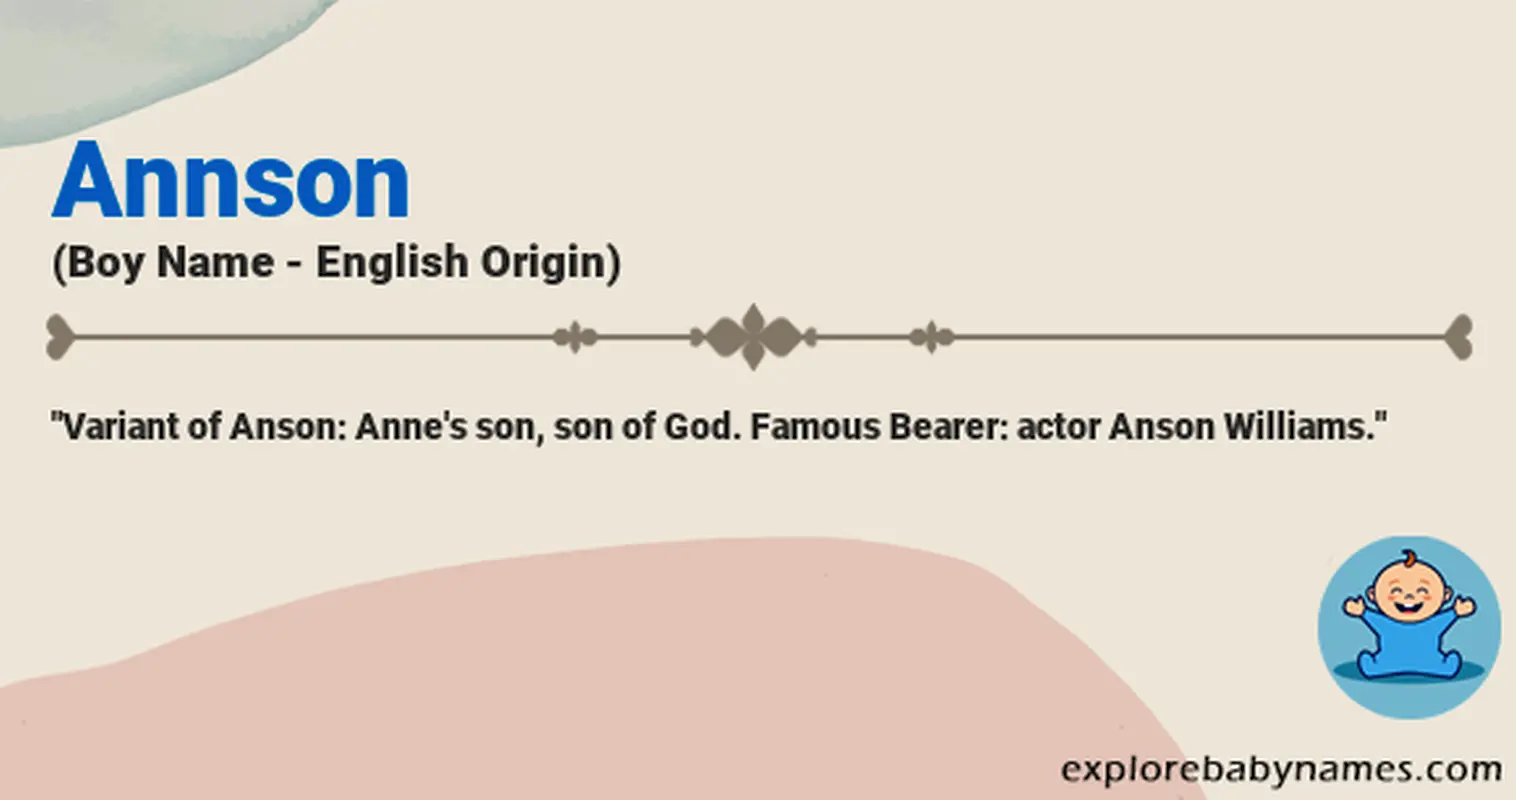 Meaning of Annson